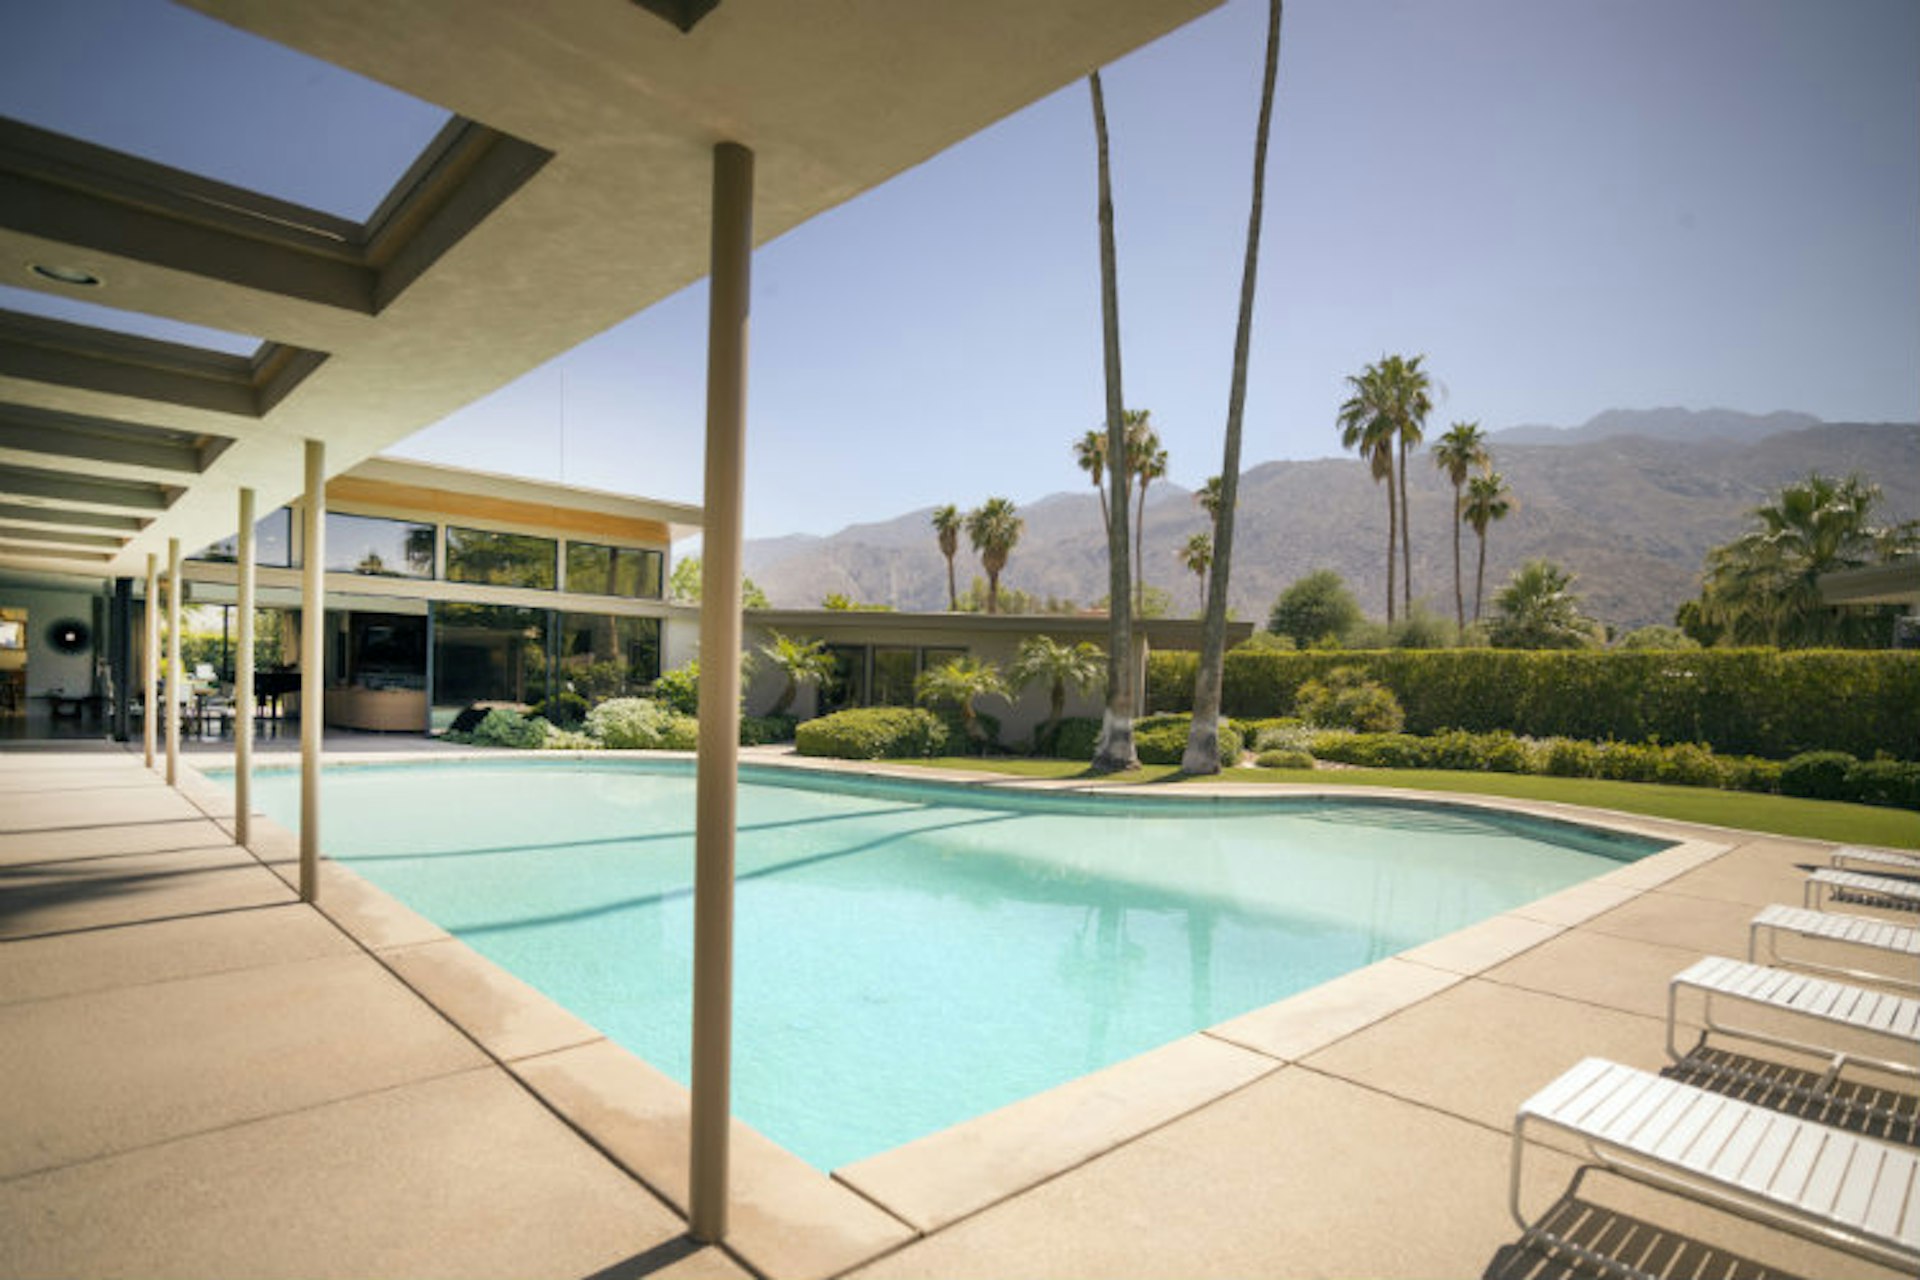 Make like Marilyn Monroe and enjoy the retro glamour of Palm Springs Image by Carol M. Highsmith / Buyenlarge / Getty